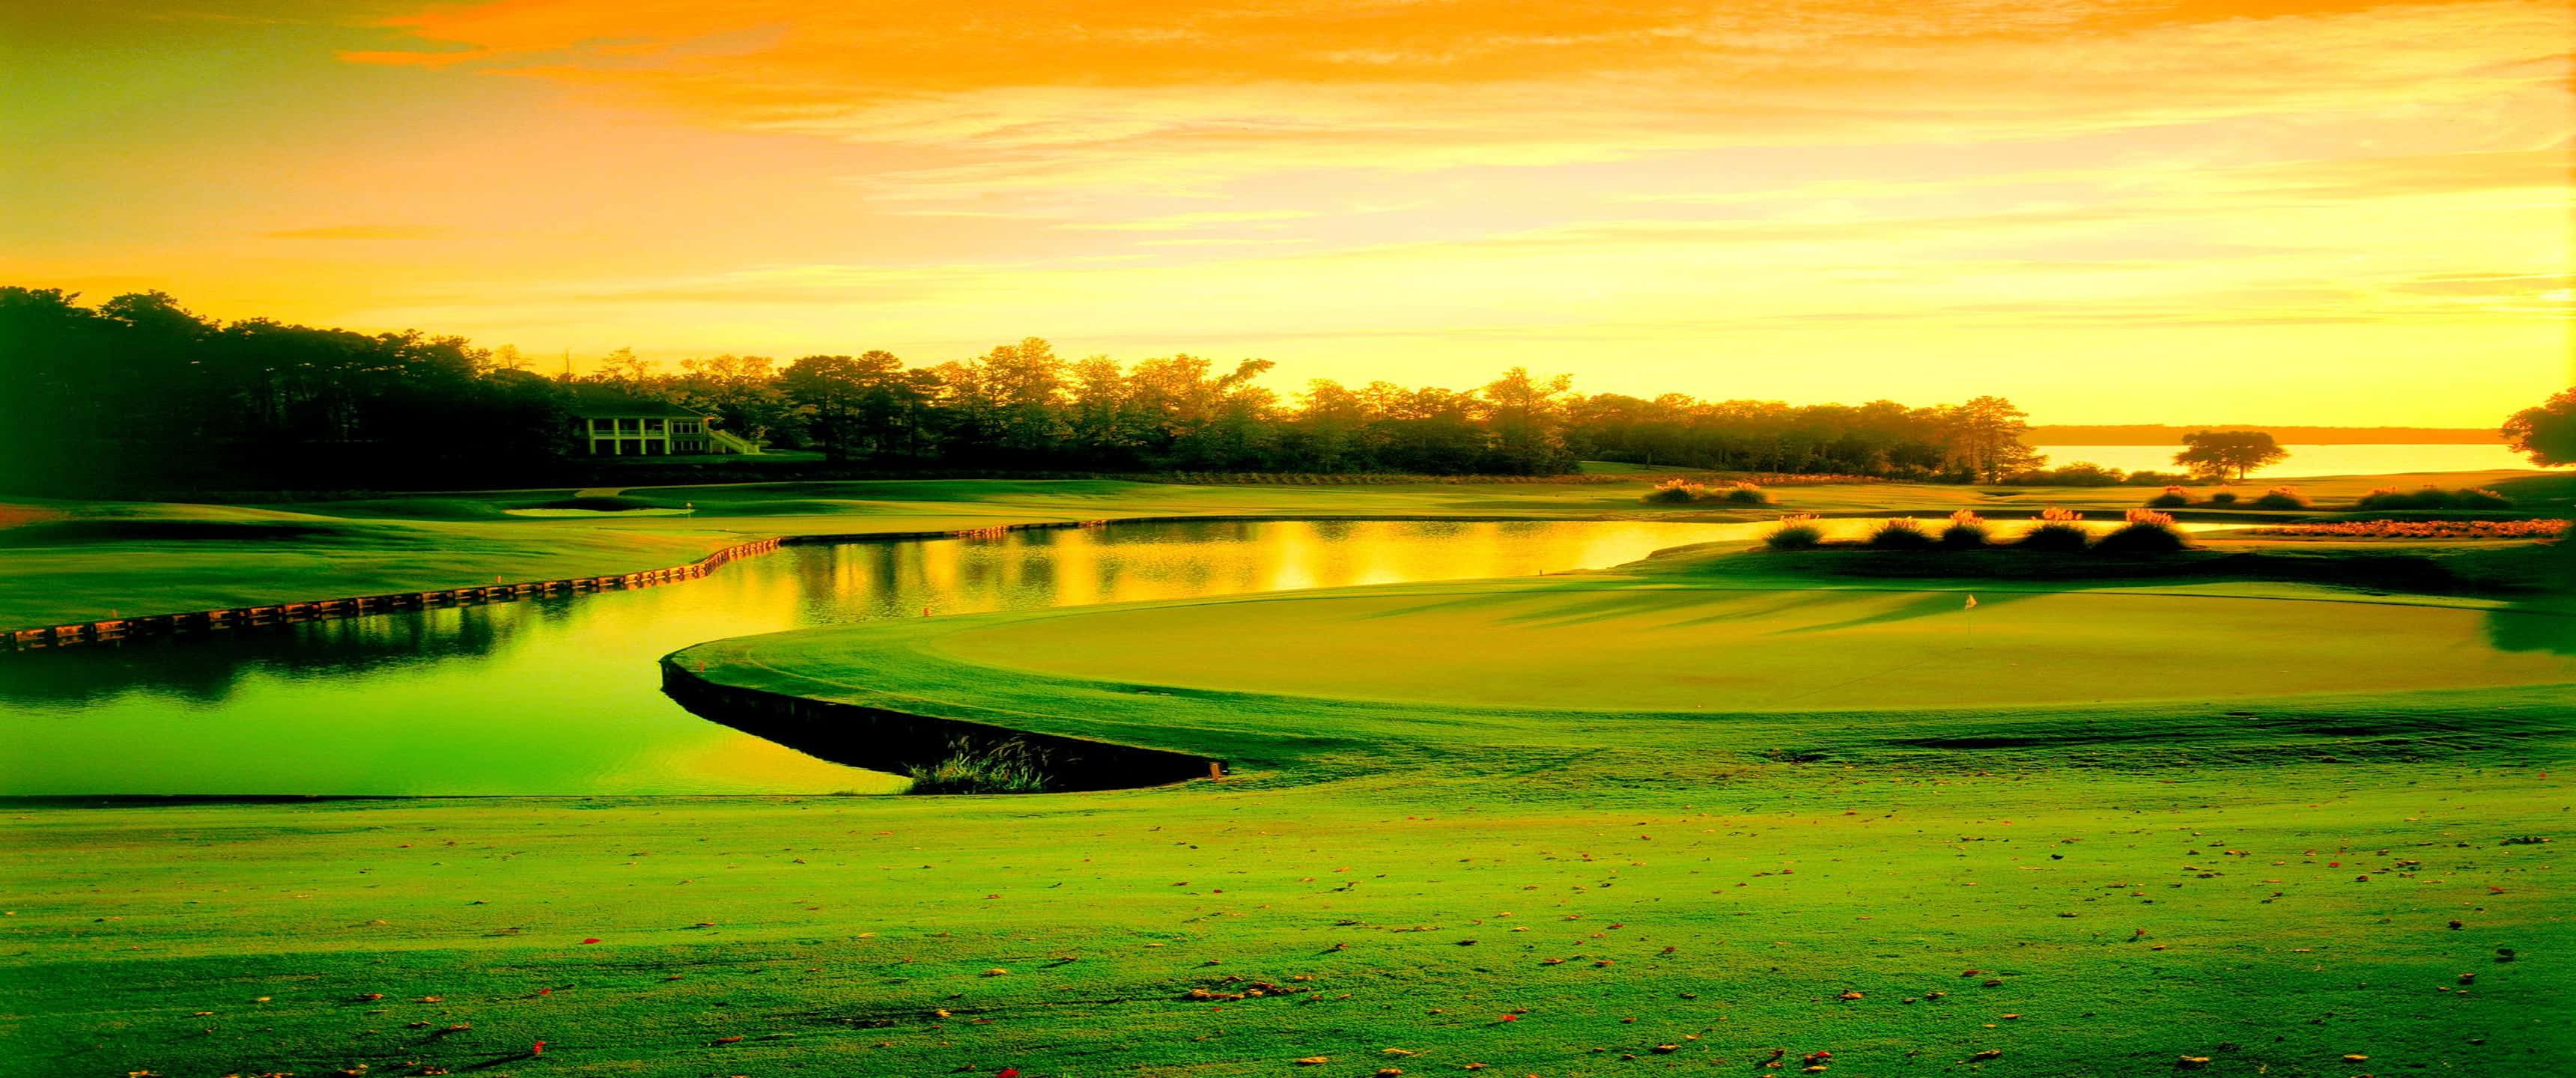 Sunset In Augusta 3440x1440p Golf Course Background